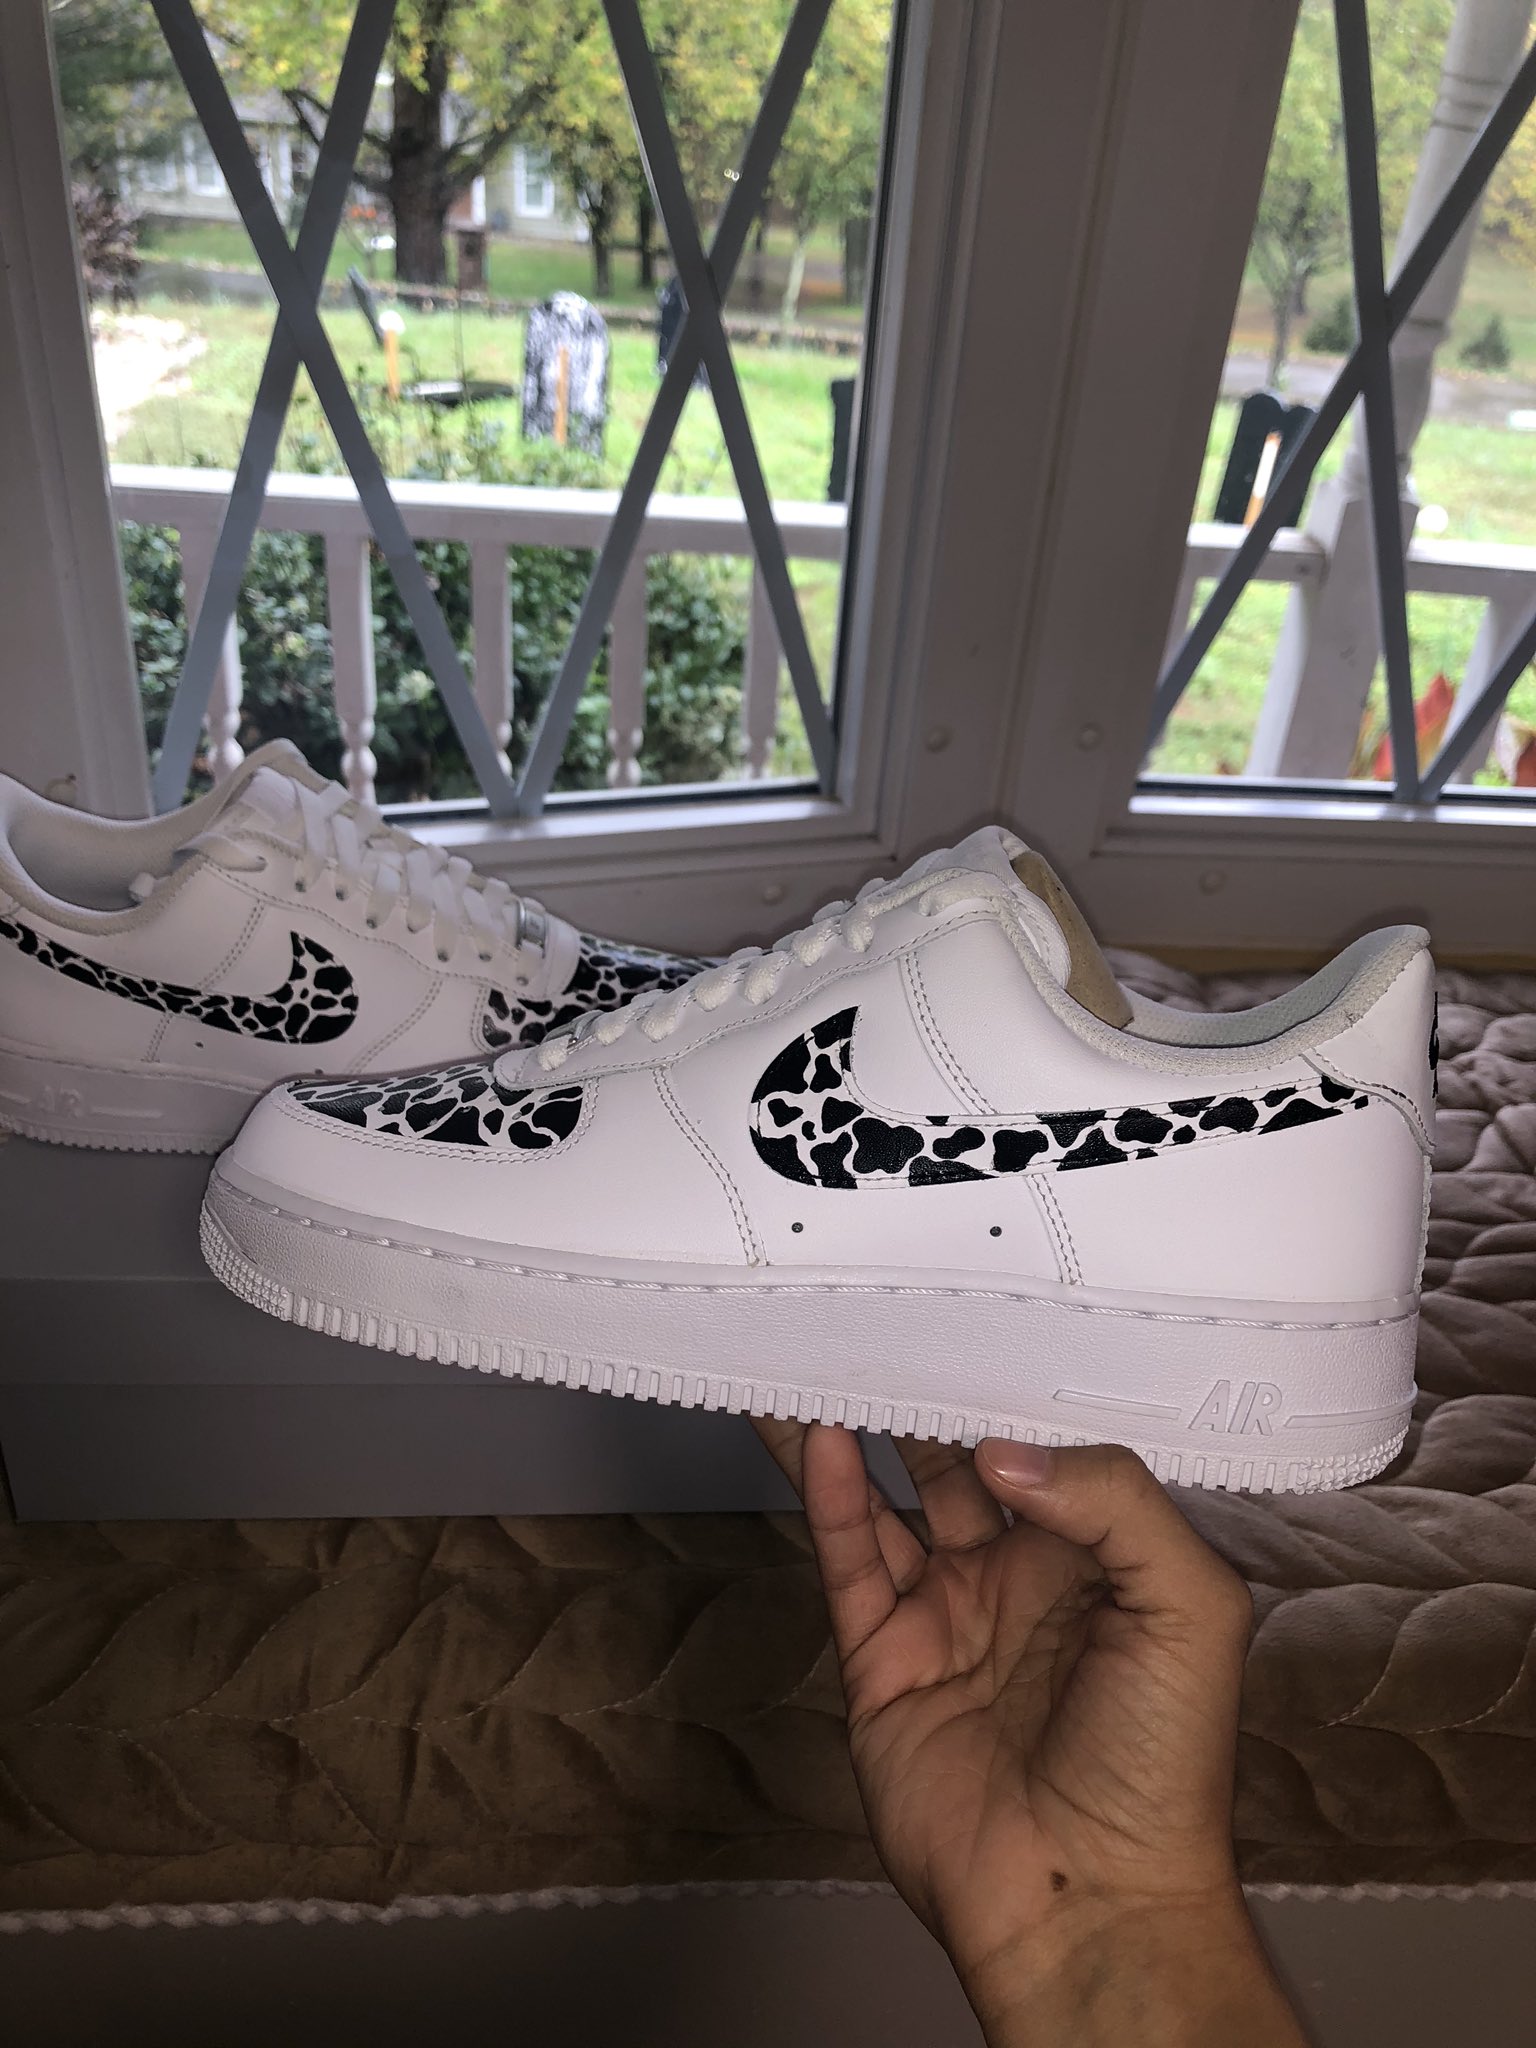 Cow print Af1s and Lakers themed Jordan 